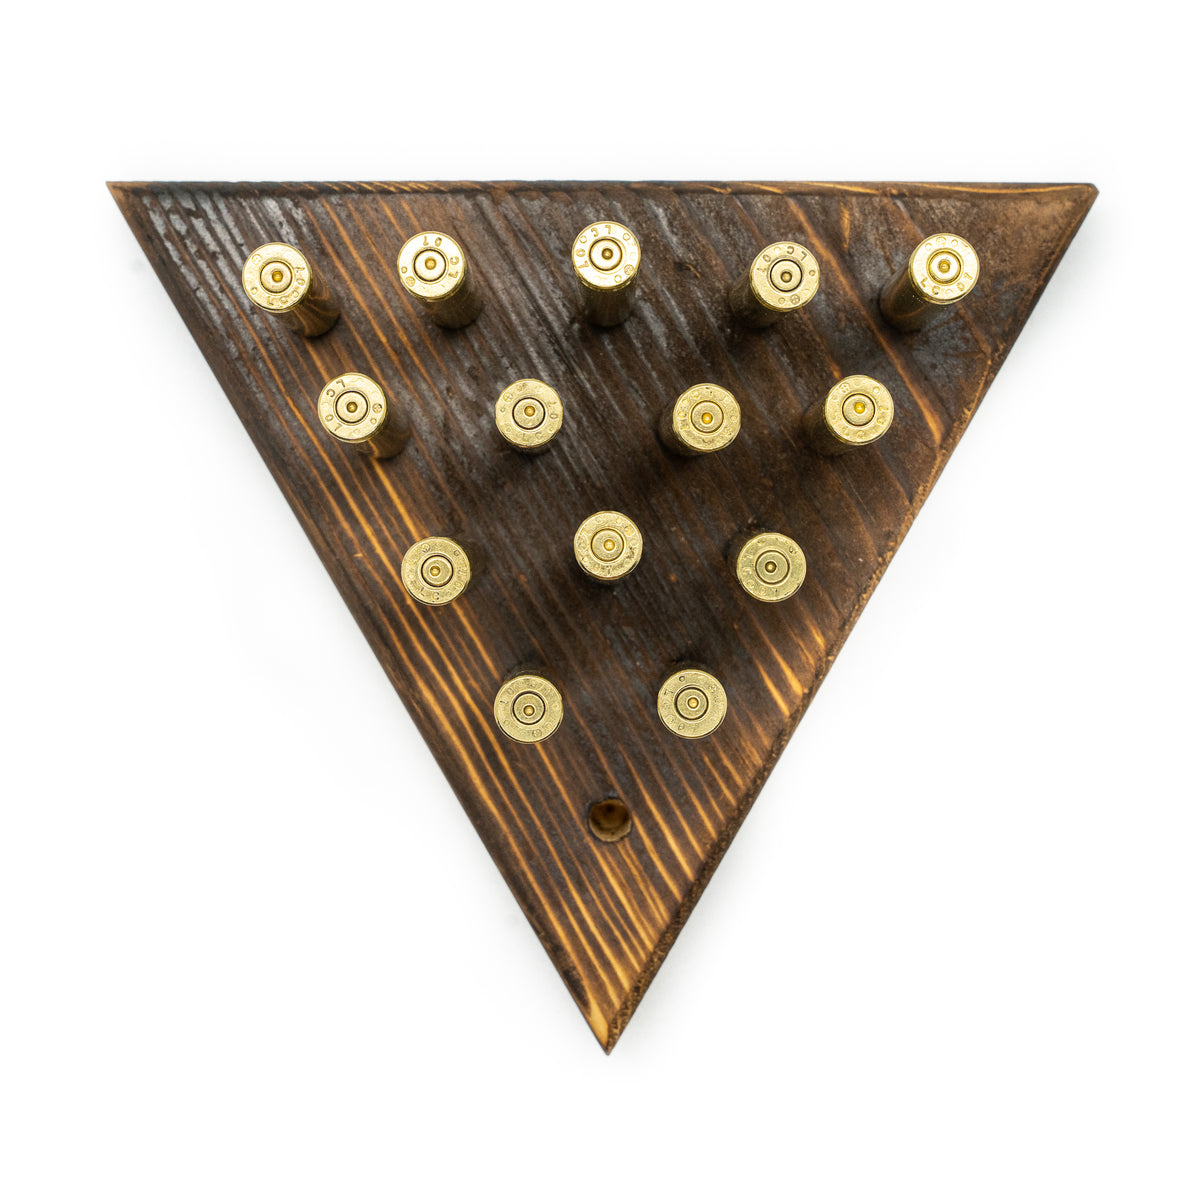 Tricky Triangle - Peg Solitaire - Bullet Peg Game Puzzle - Cracker Barrel Board Game - Wood Jumping Peg Game - Gifts For Kids